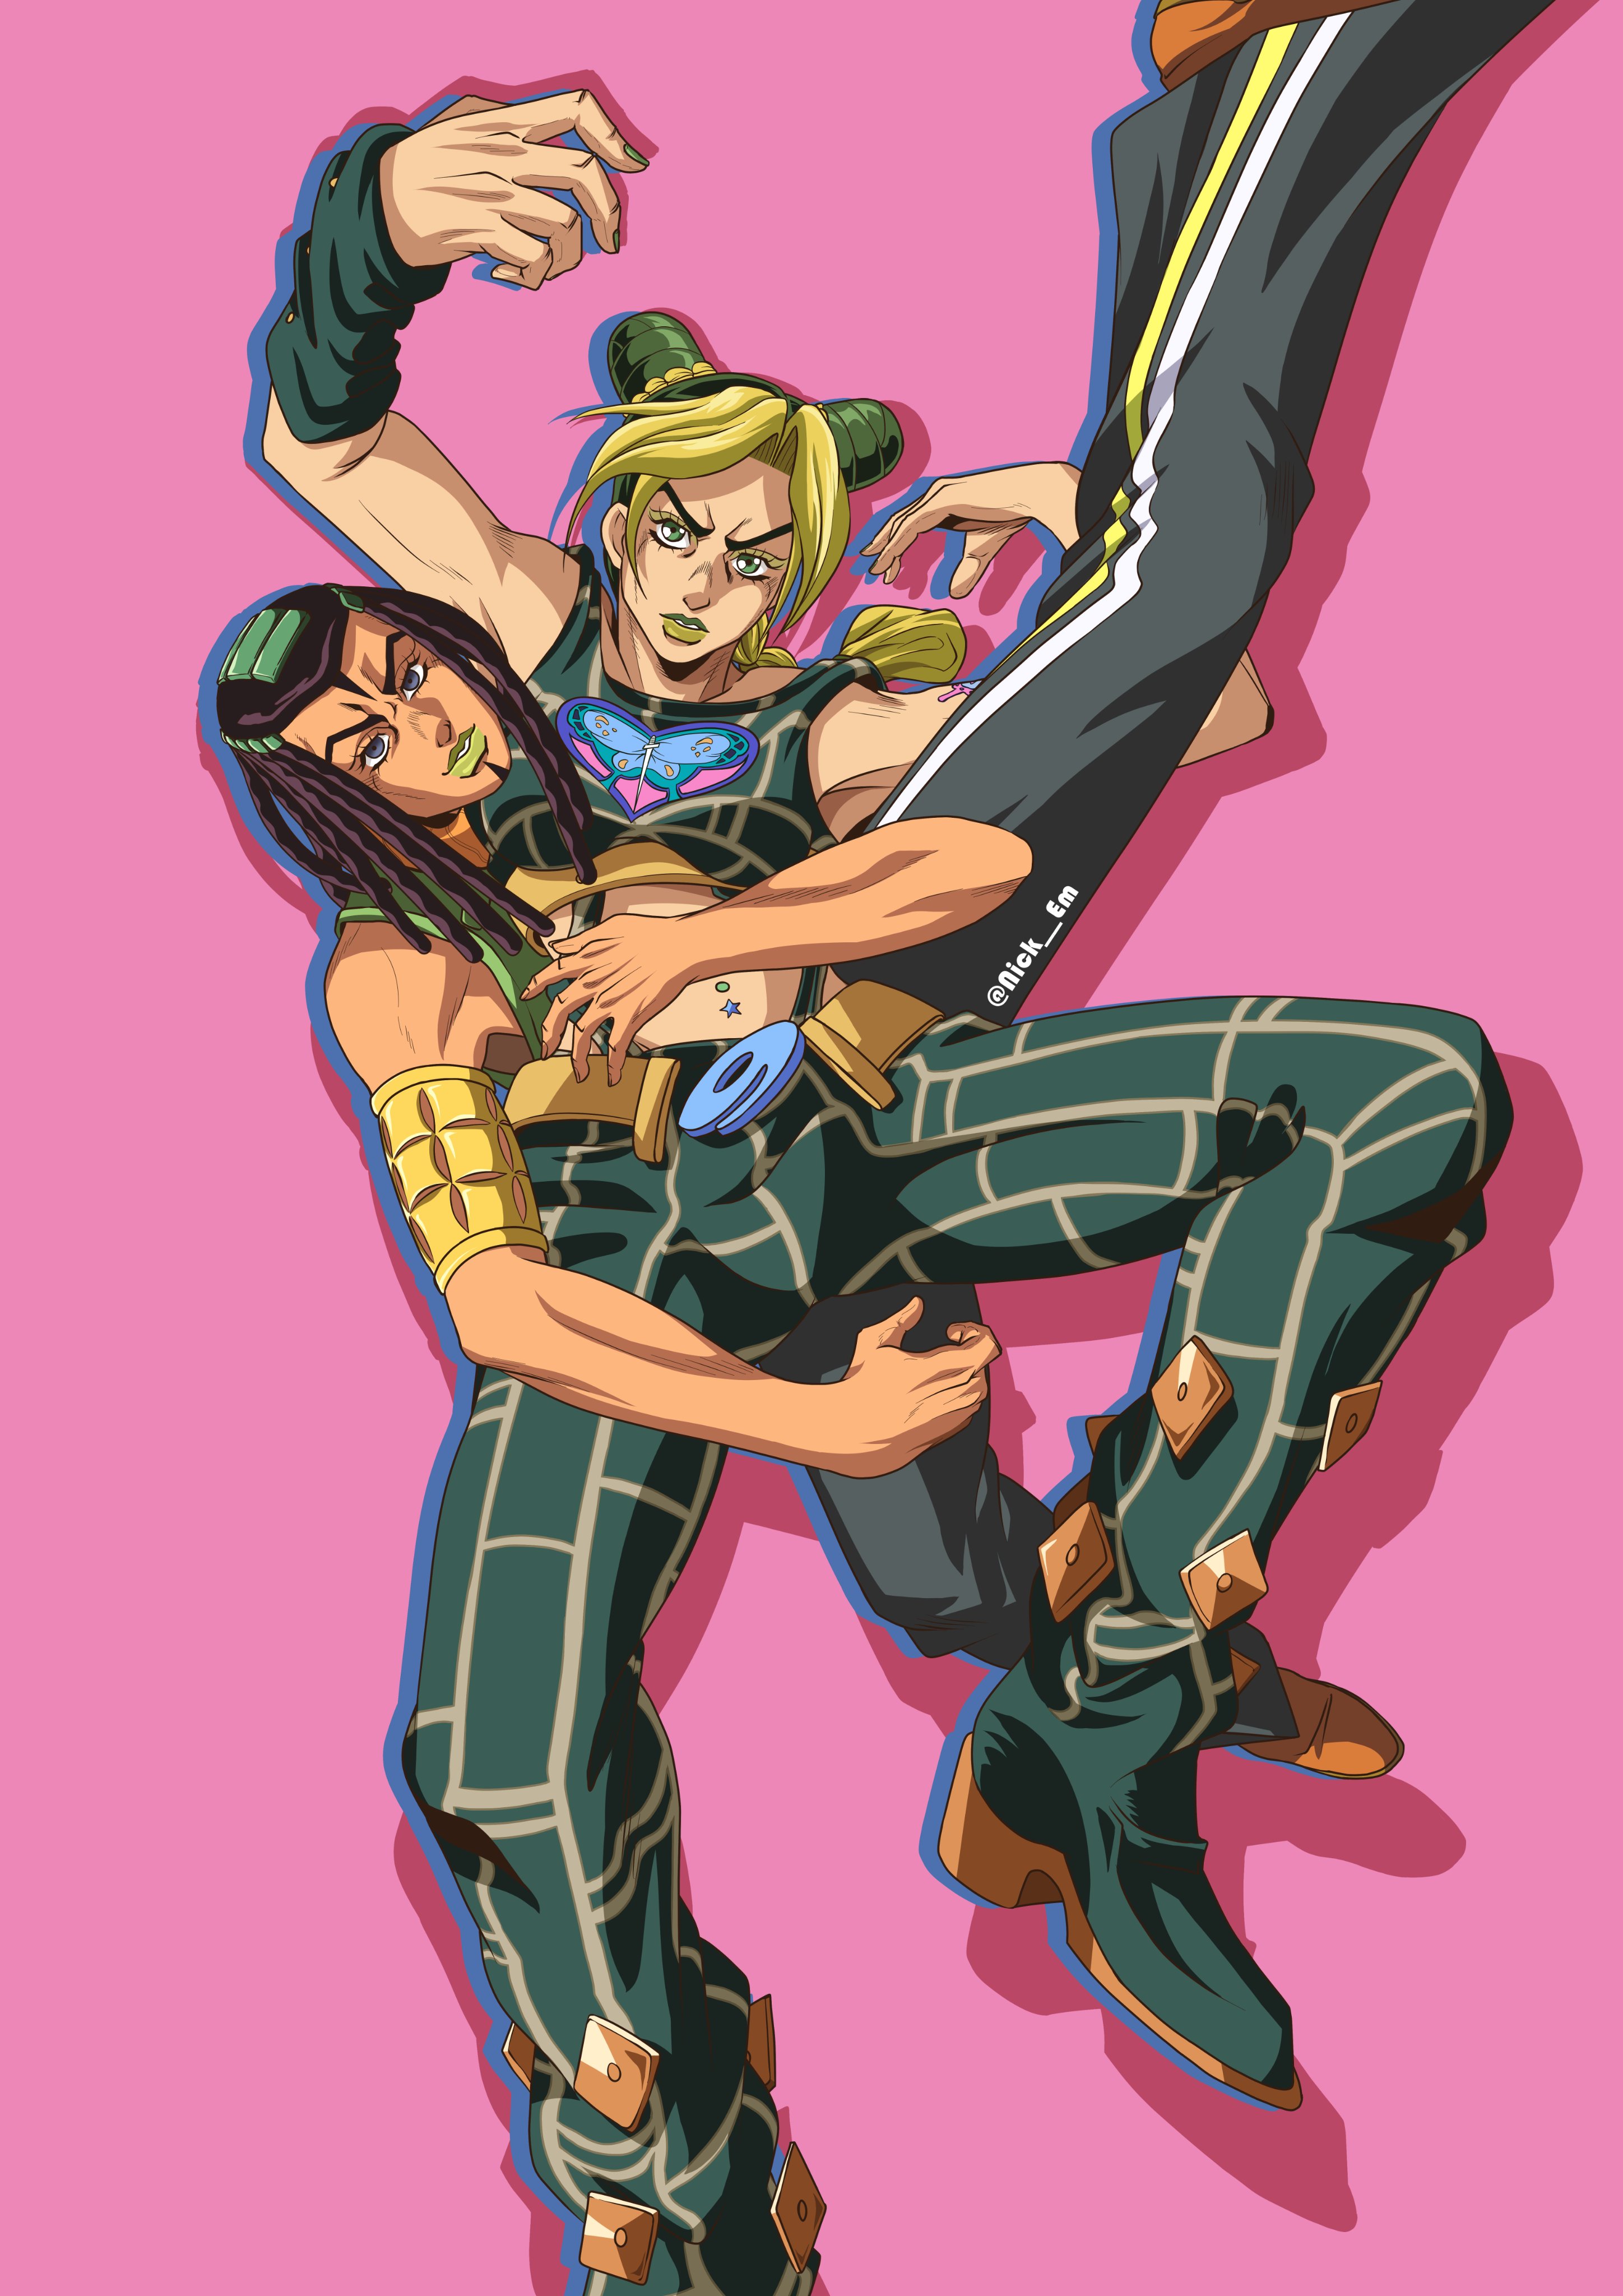 STICKER ⍟ on X: What's your Favorite Stand from JoJolion?   / X